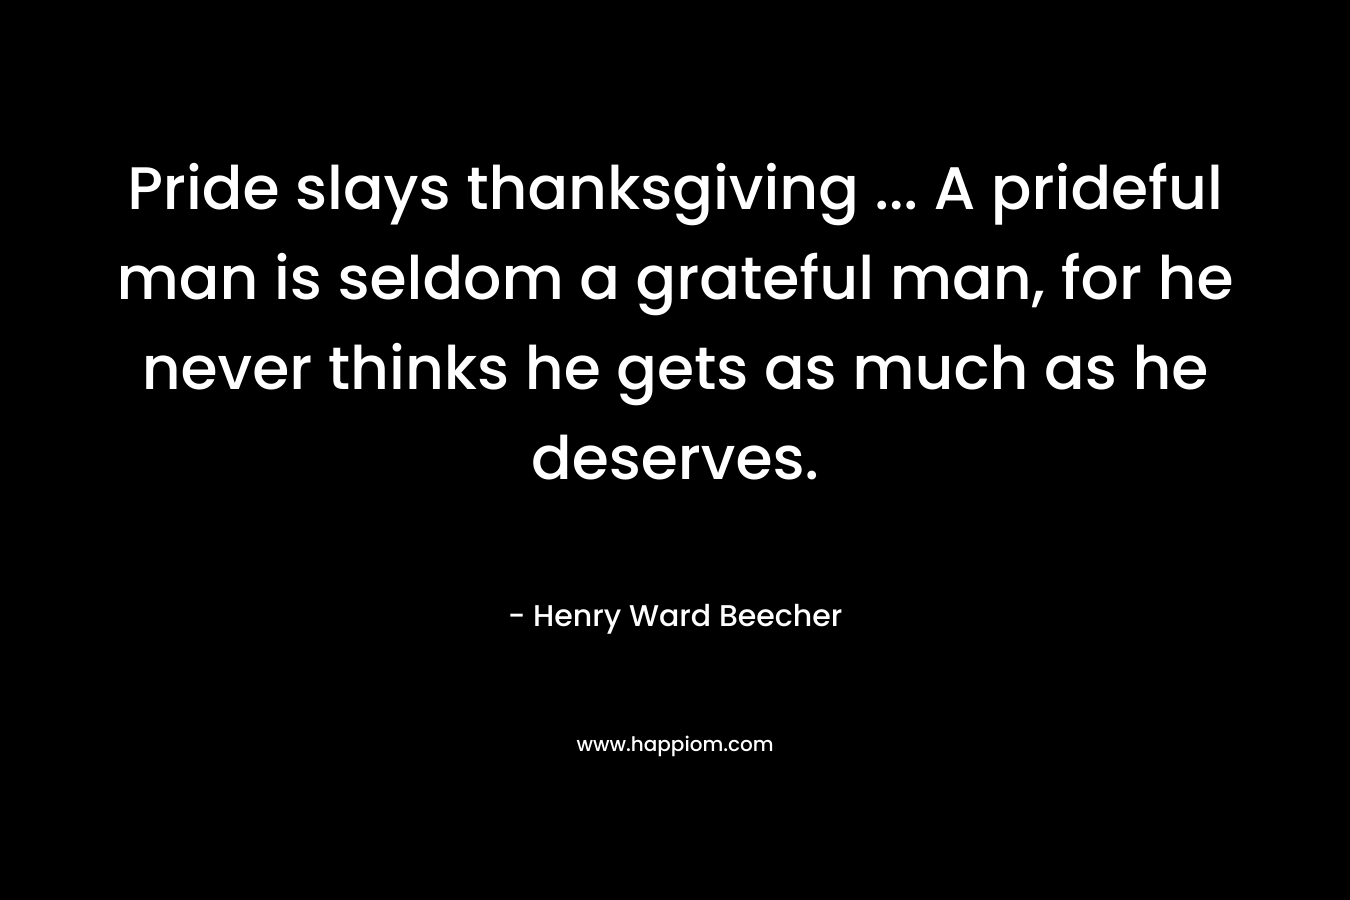 Pride slays thanksgiving … A prideful man is seldom a grateful man, for he never thinks he gets as much as he deserves. – Henry Ward Beecher